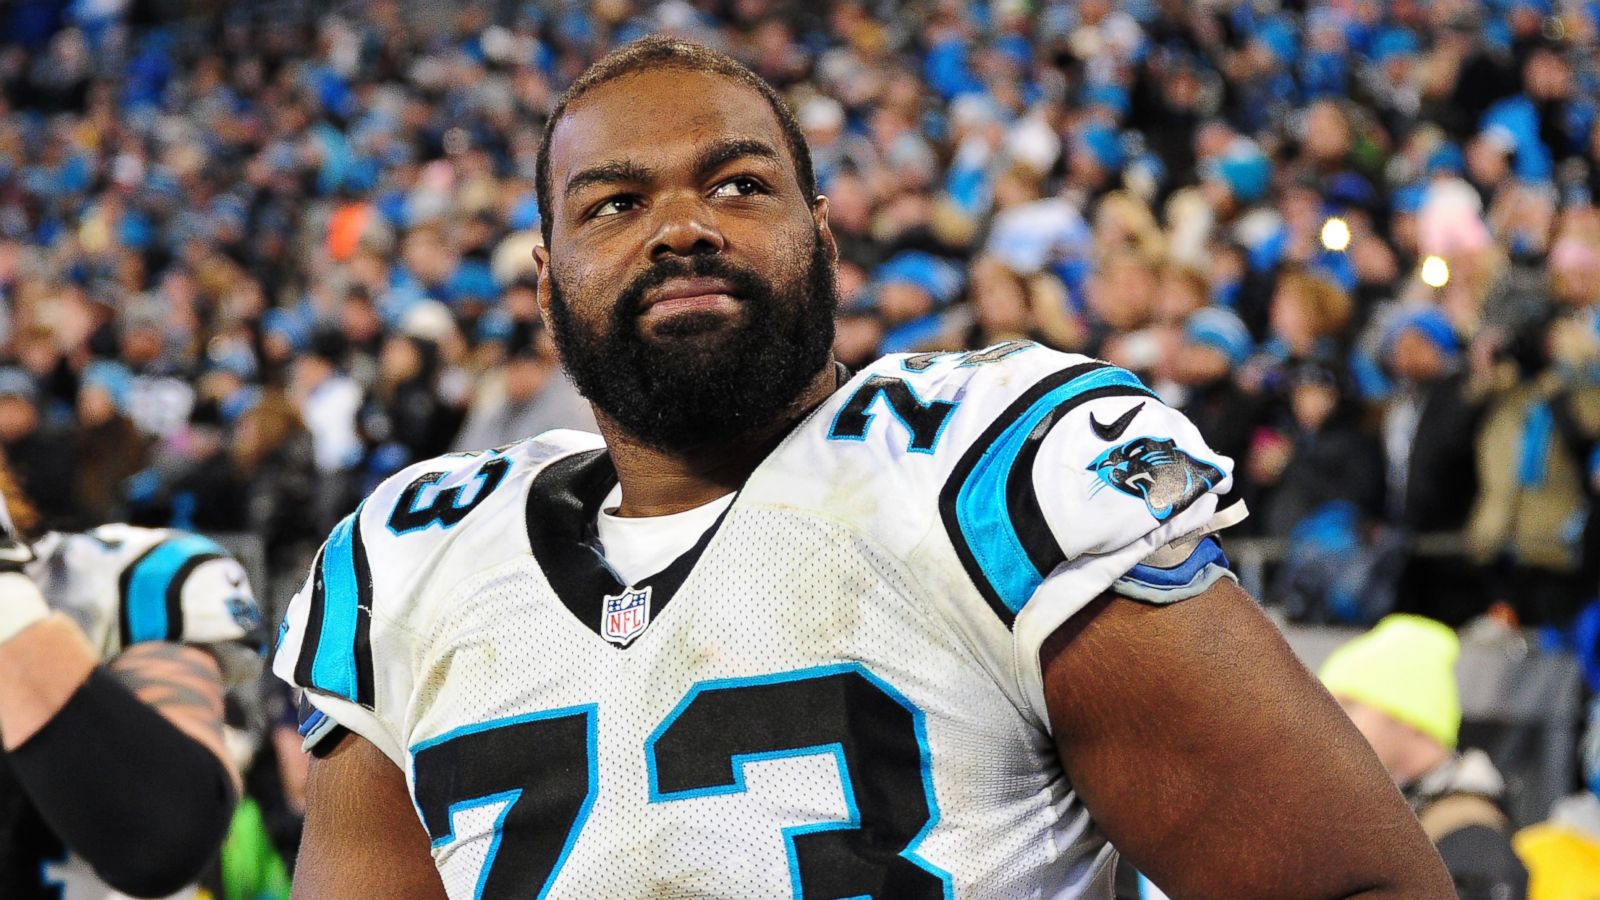 PHOTO: In this Jan. 24, 2016, file photo, Michael Oher of the Carolina Panthers watches play against the Arizona Cardinals during the NFC Championship Game, in Charlotte, N.C.